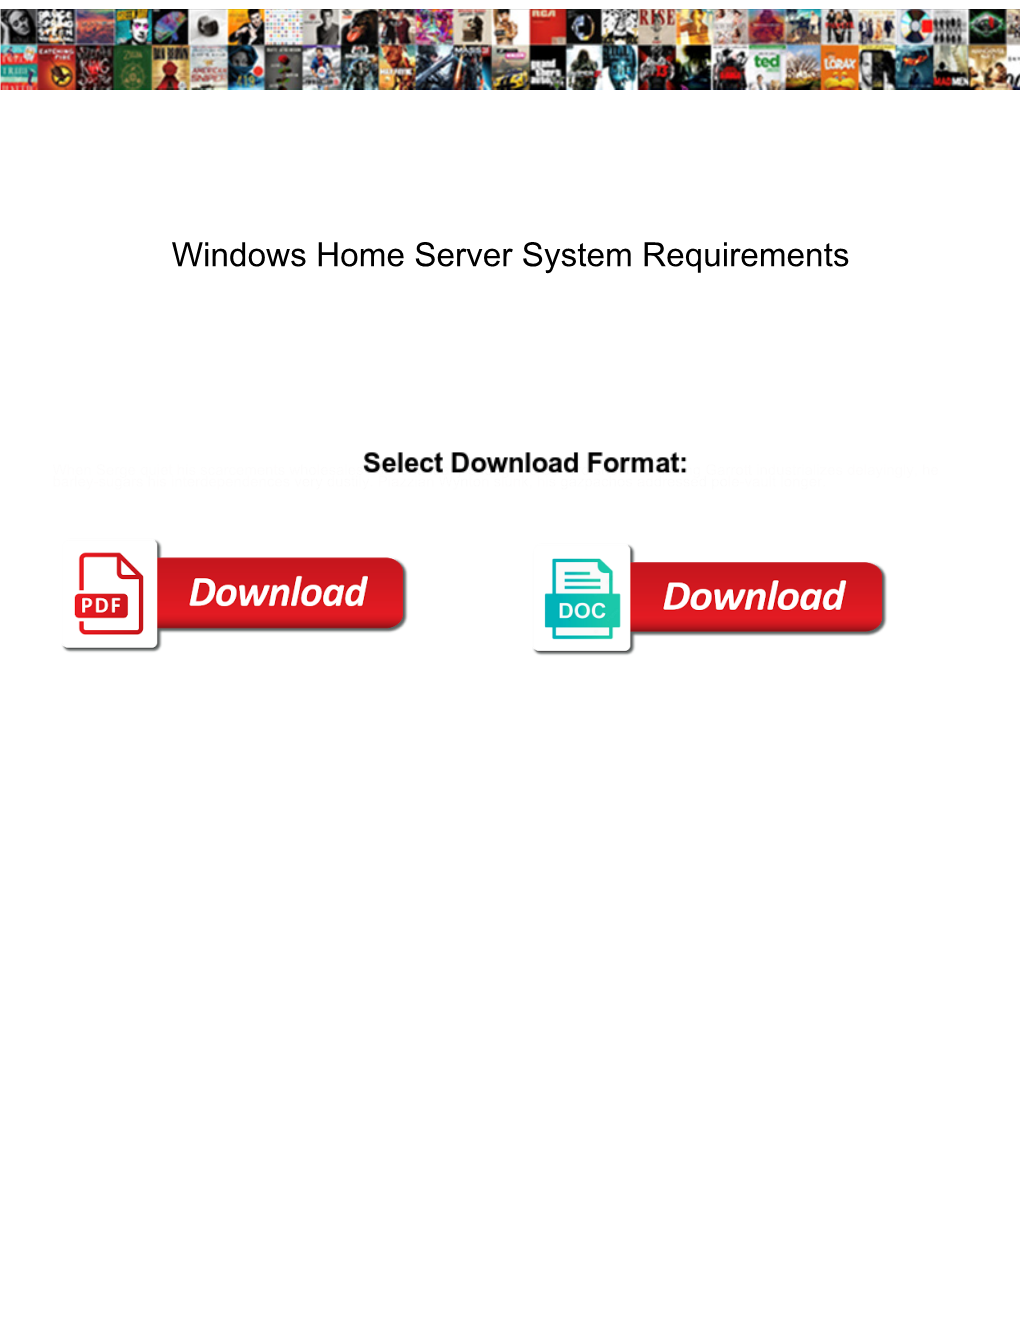 Windows Home Server System Requirements